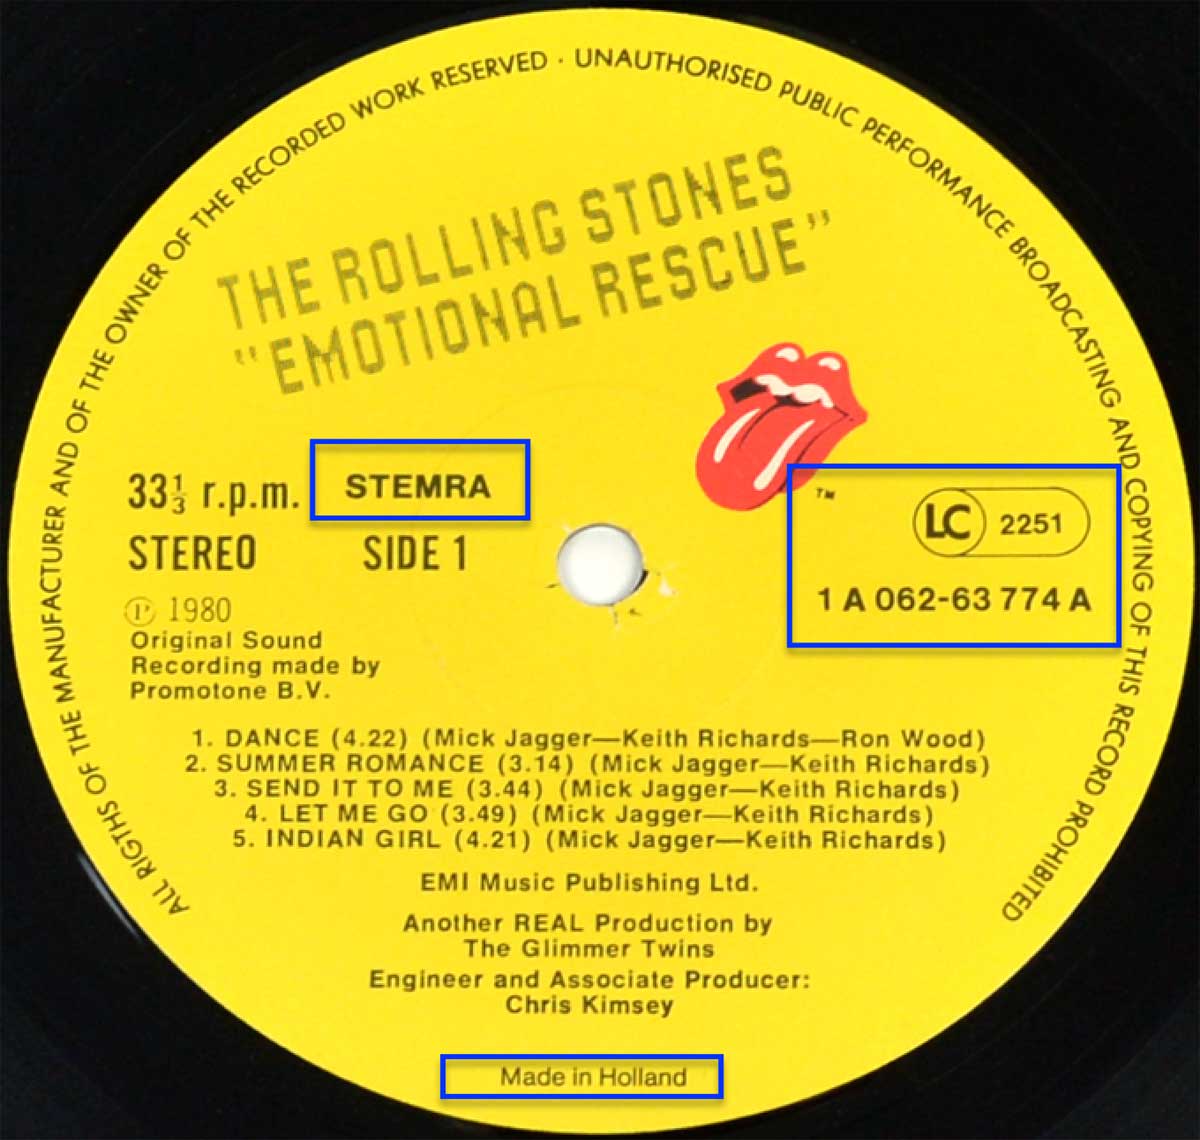 Enlarged & Zoomed photo of "ROLLING STONES - Emotional Rescue" Record's Label